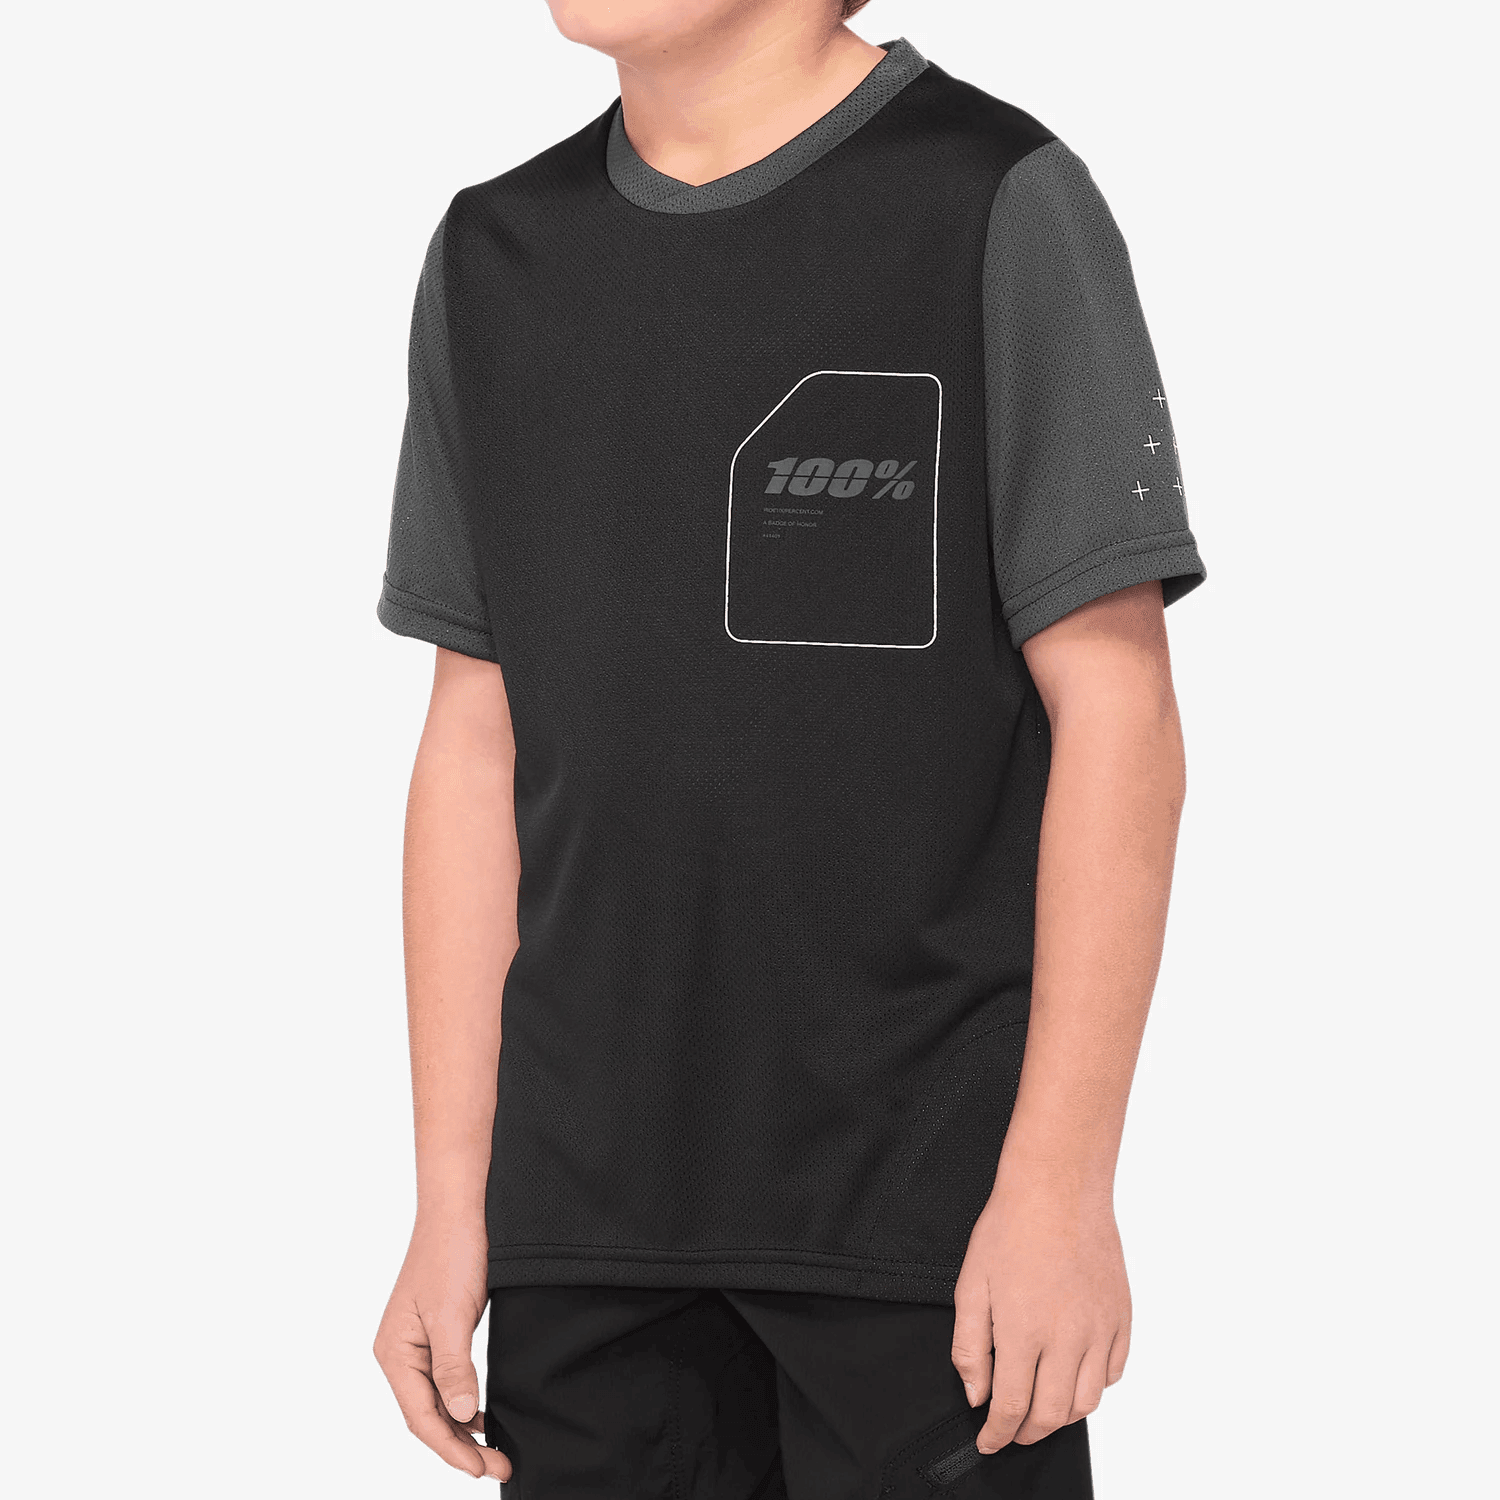 100% 100% Ridecamp Youth Jersey Black/Charcoal / S